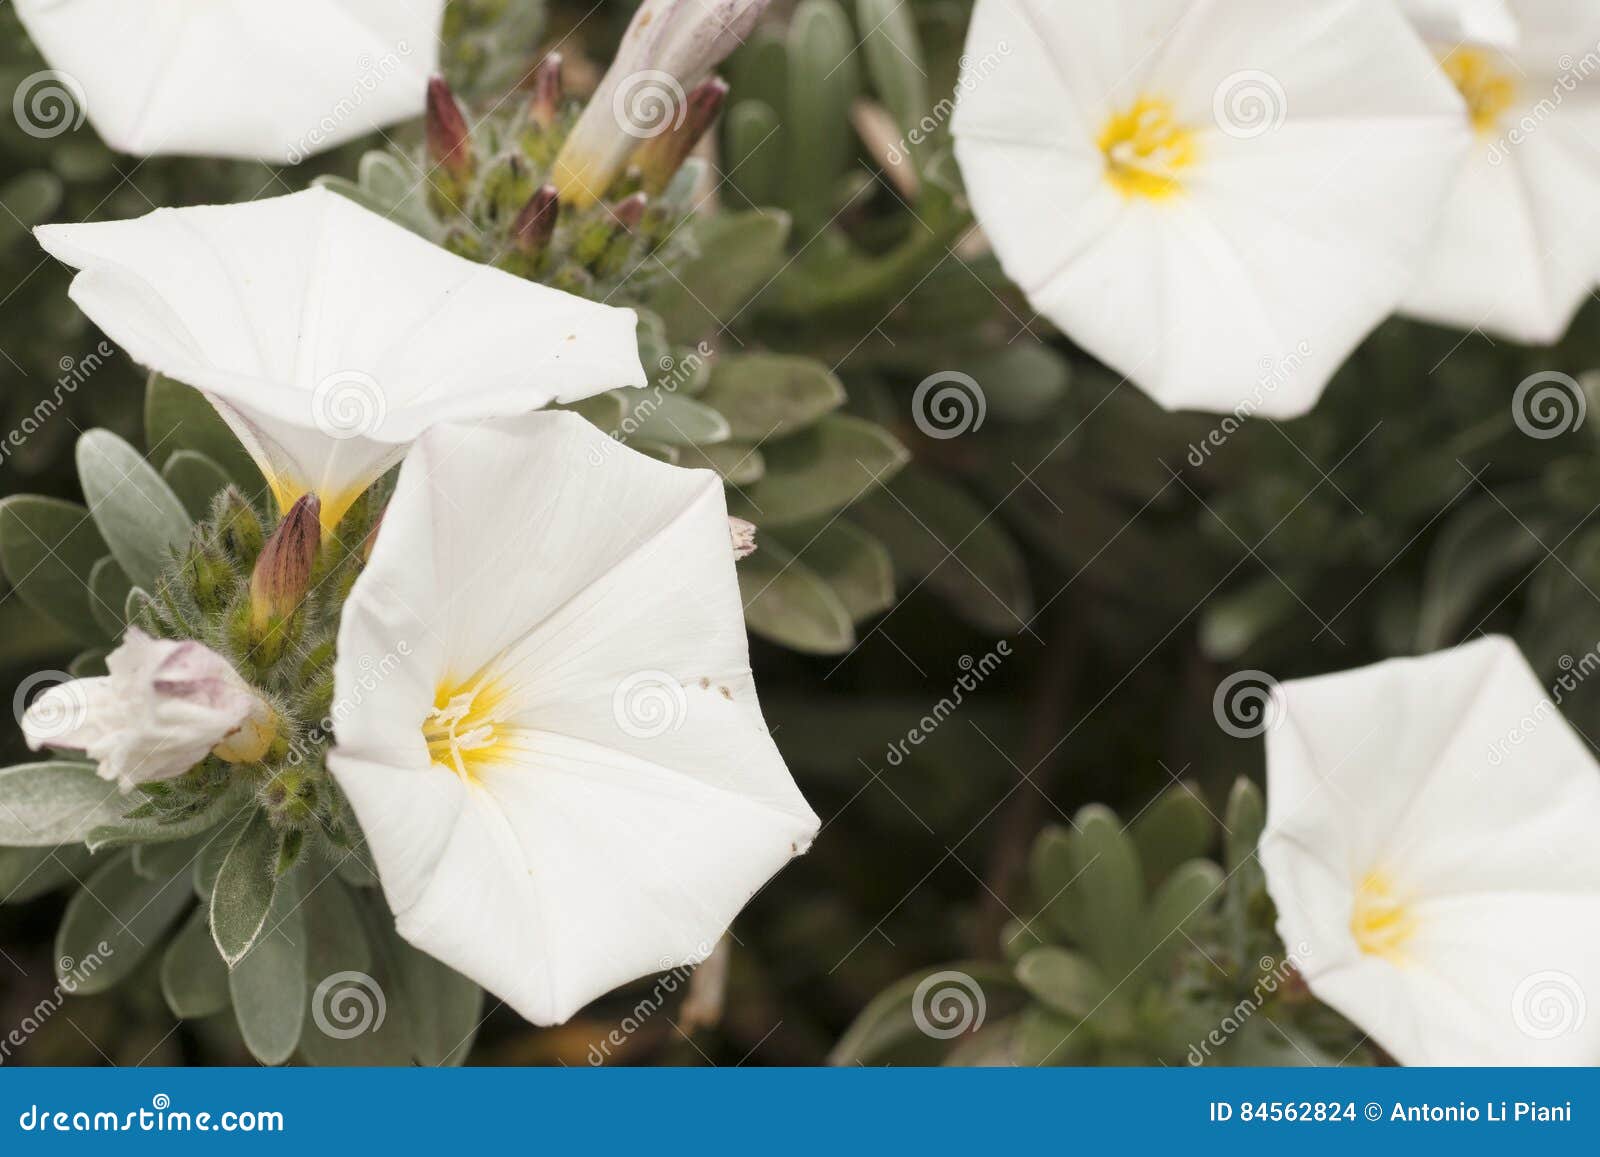 white flowers grown in the country